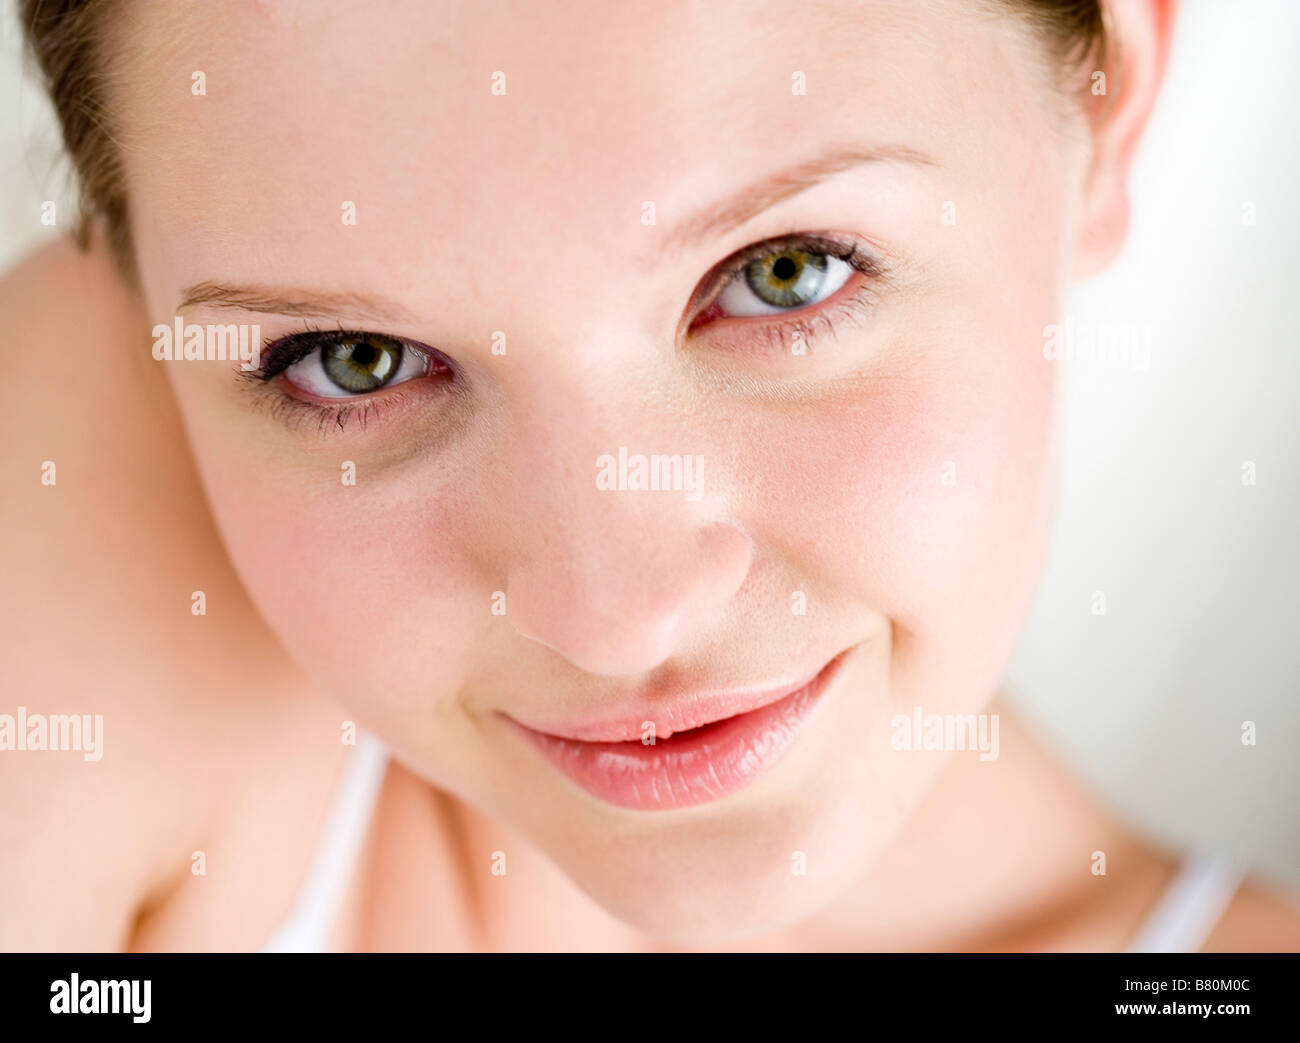 Young woman smiling looking at the camera Stock Photo